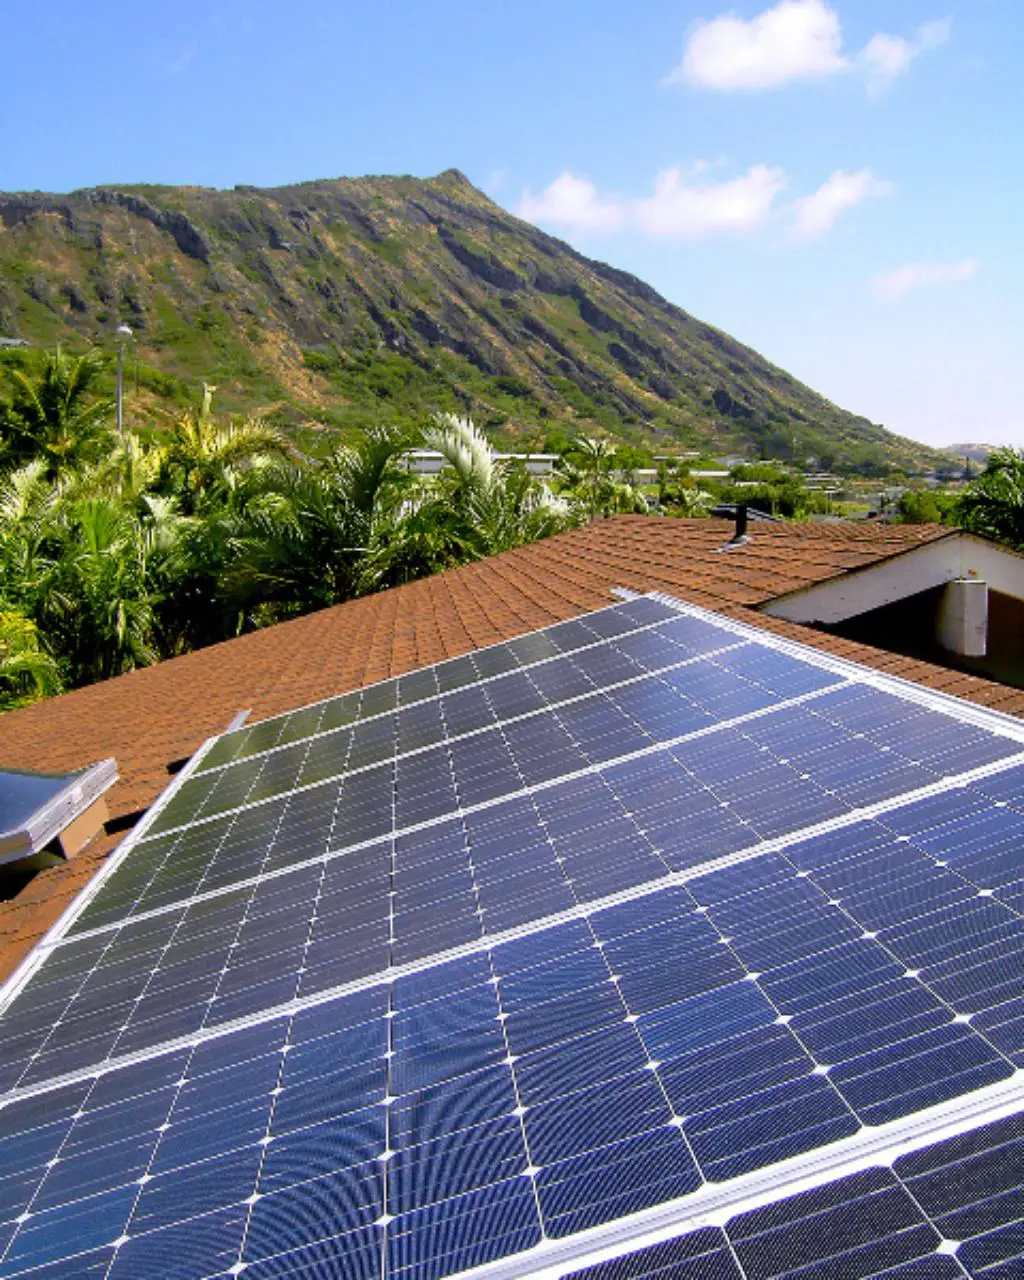 Living Hawaii: Rooftop Solar Boosts Home Values